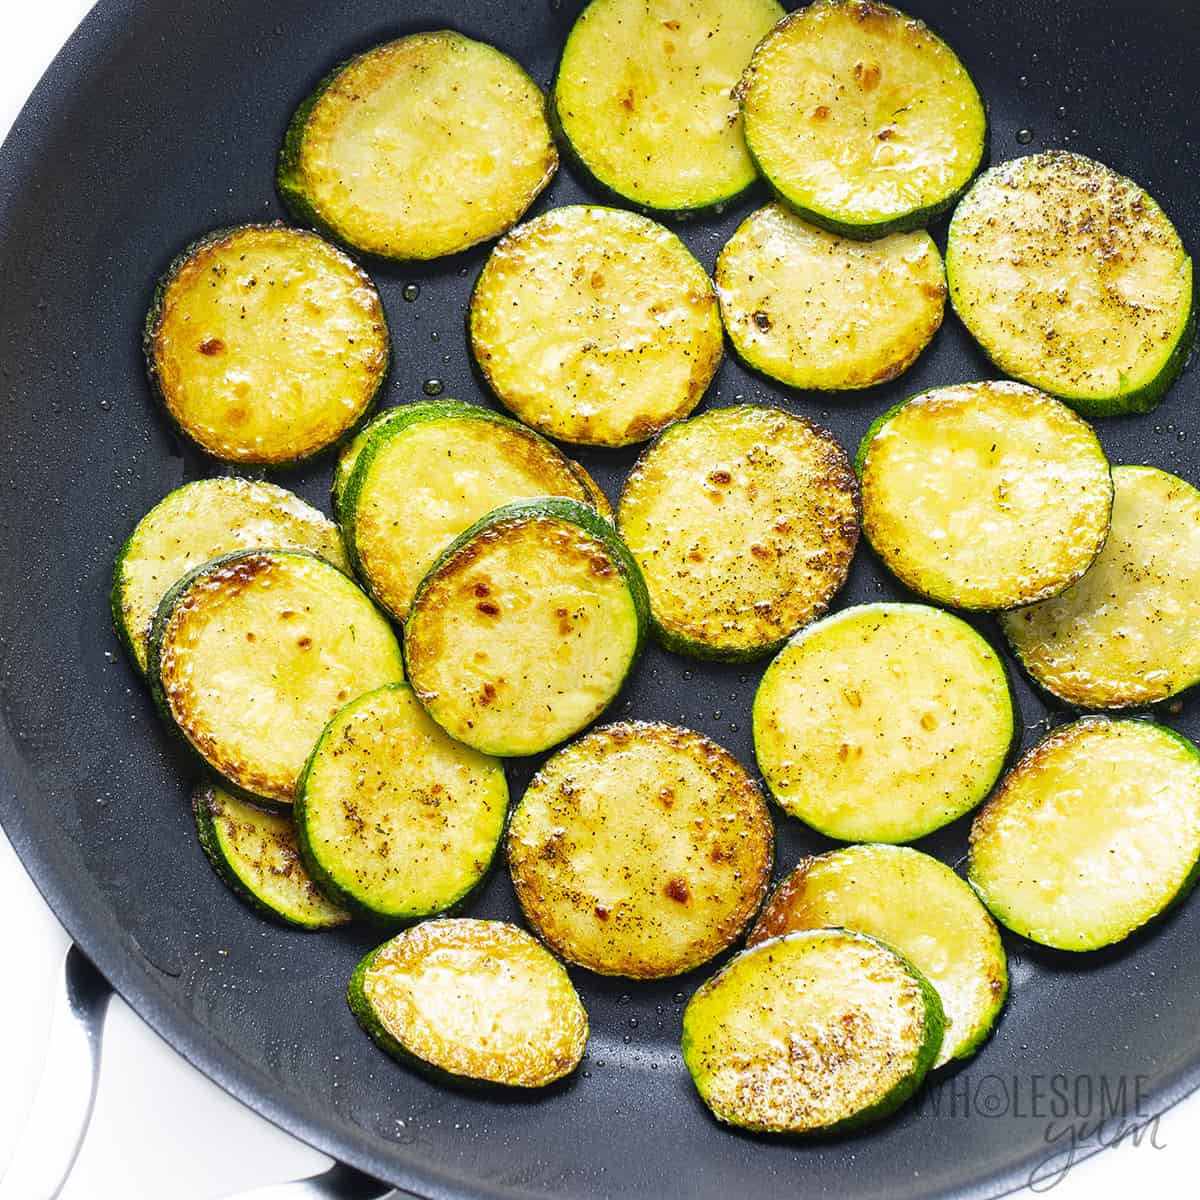 Cooking zucchini in a pan.